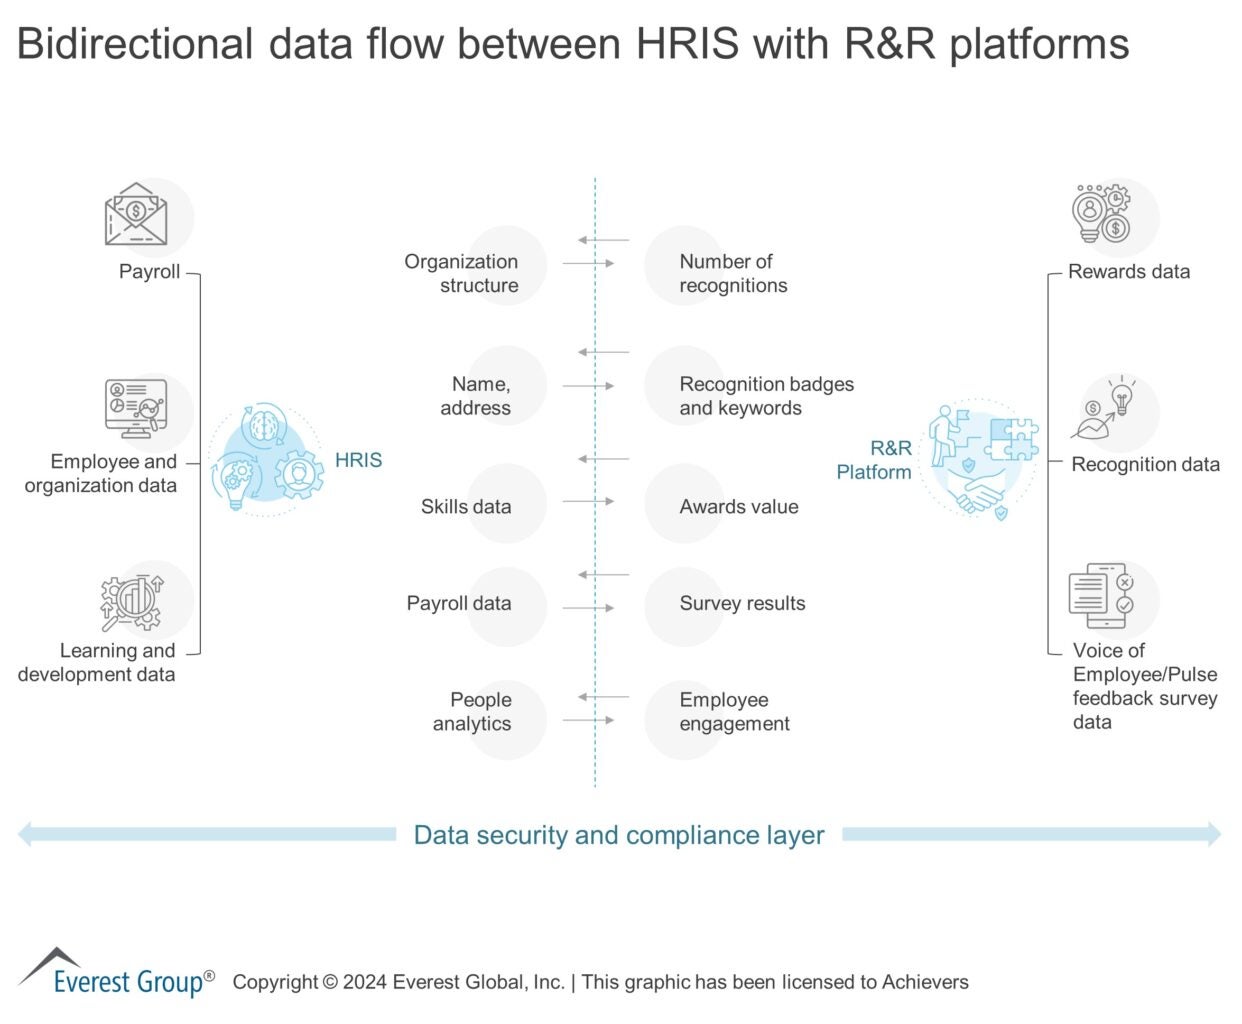 Amplifying rewards and recognition impact through HRIS integrations